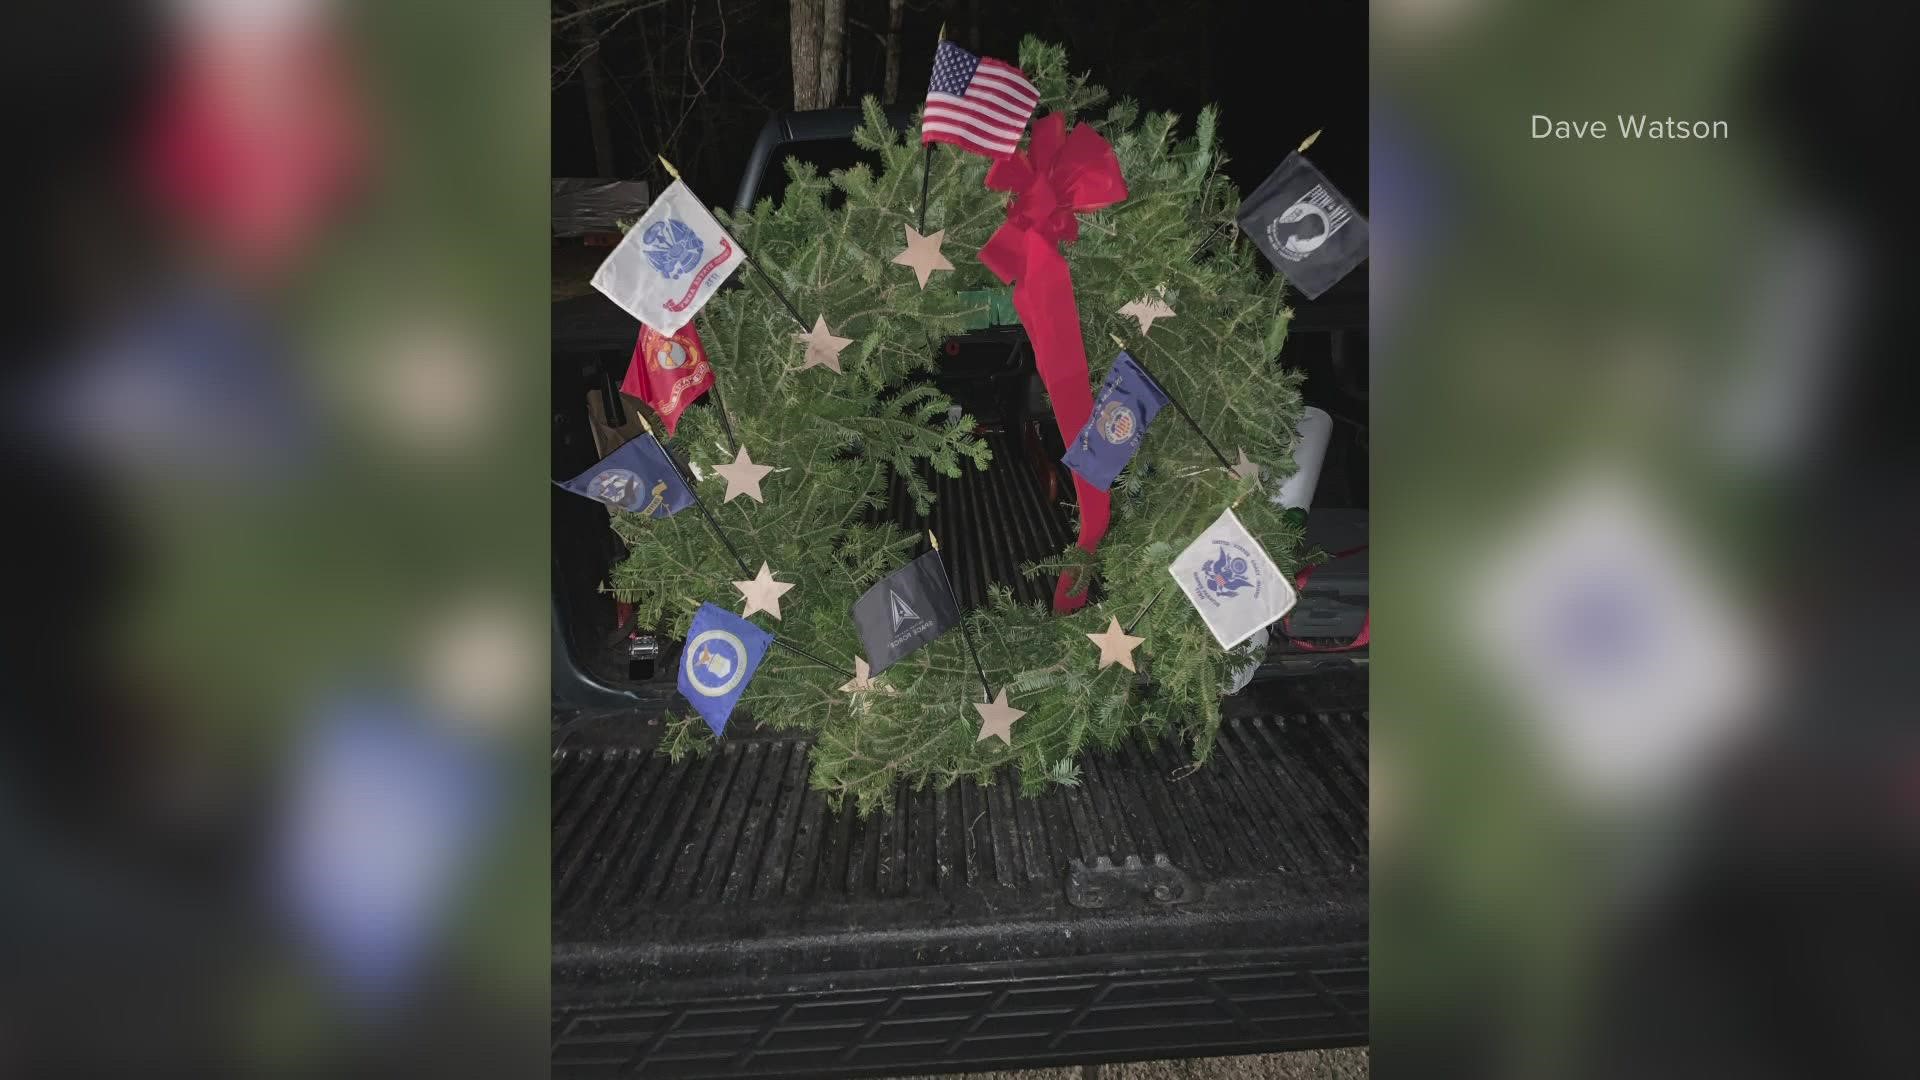 On Monday, December 13, a group of volunteers is bringing a wreath from Brunswick to Augusta for a wreath-laying ceremony as part of Wreaths Across America week.